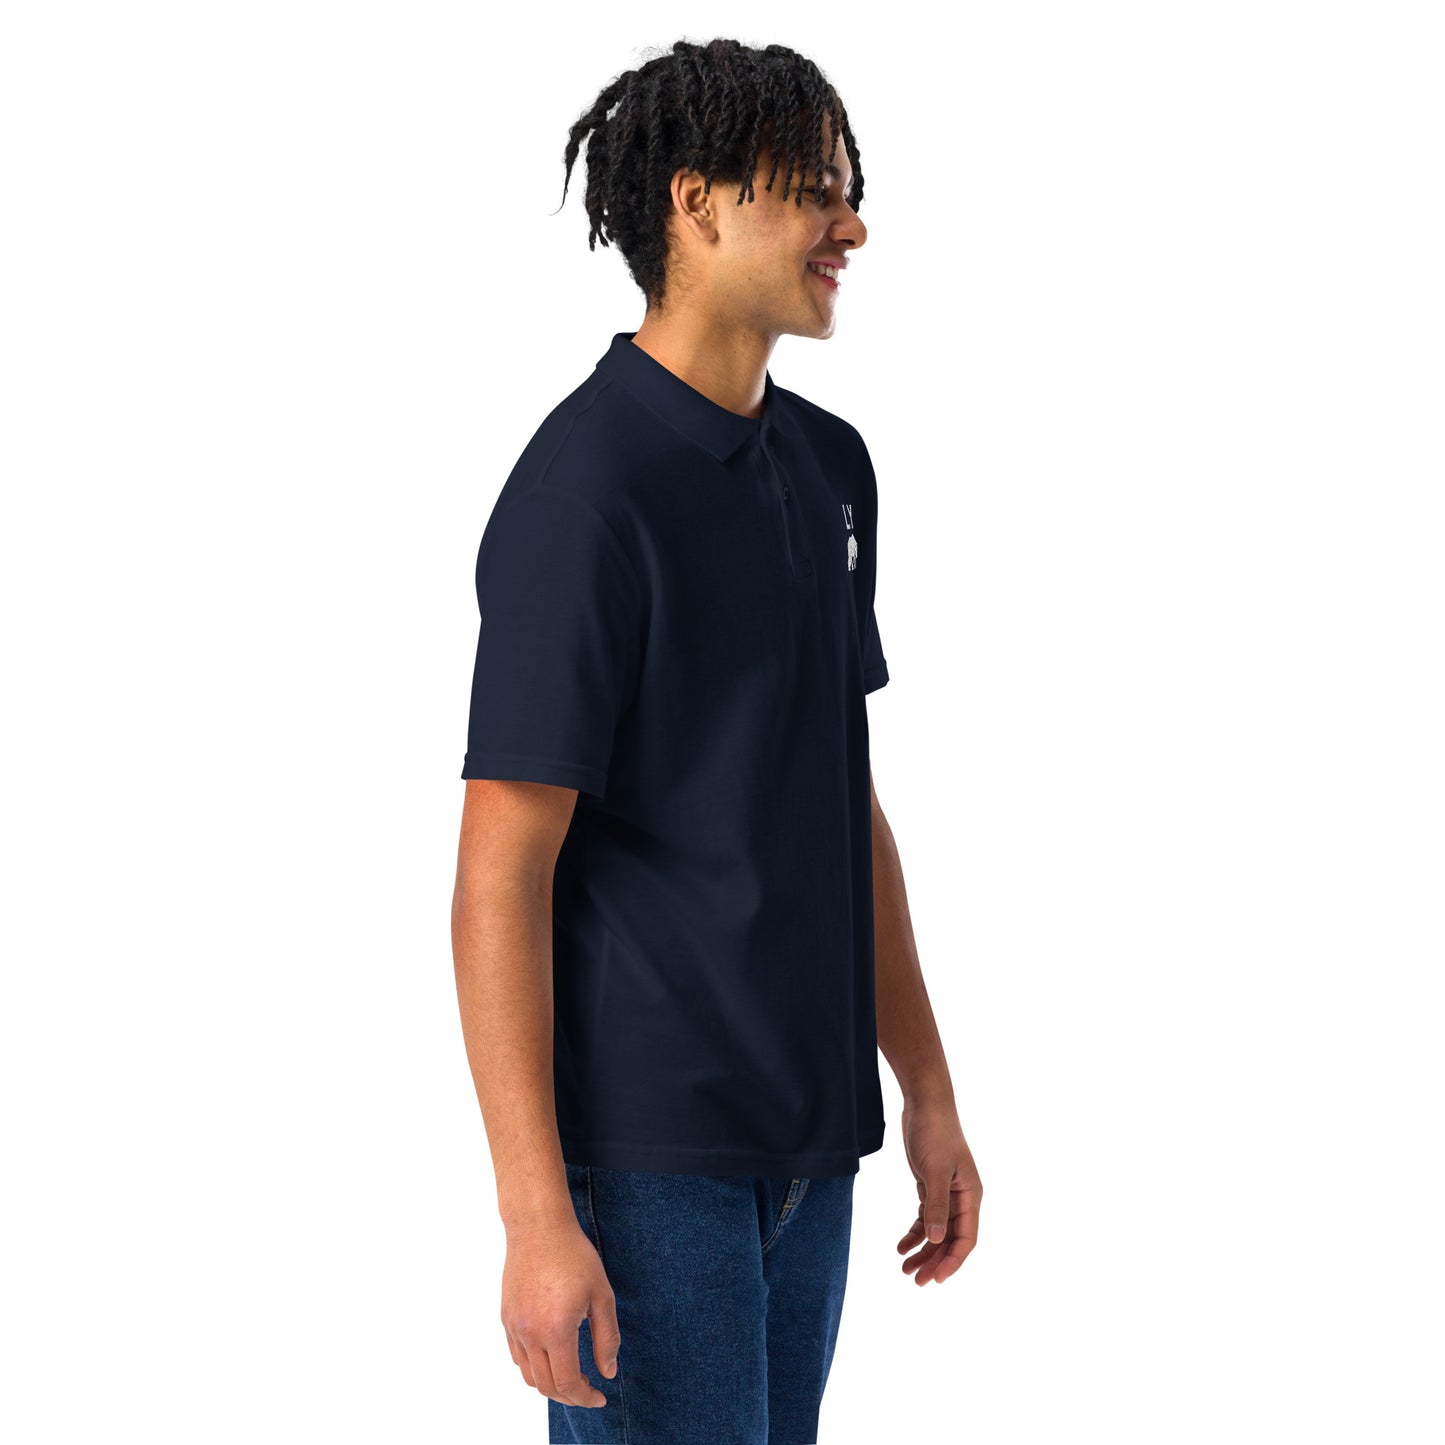 “LY” White on Navy Blue Adult Cotton Pique Polo Shirt